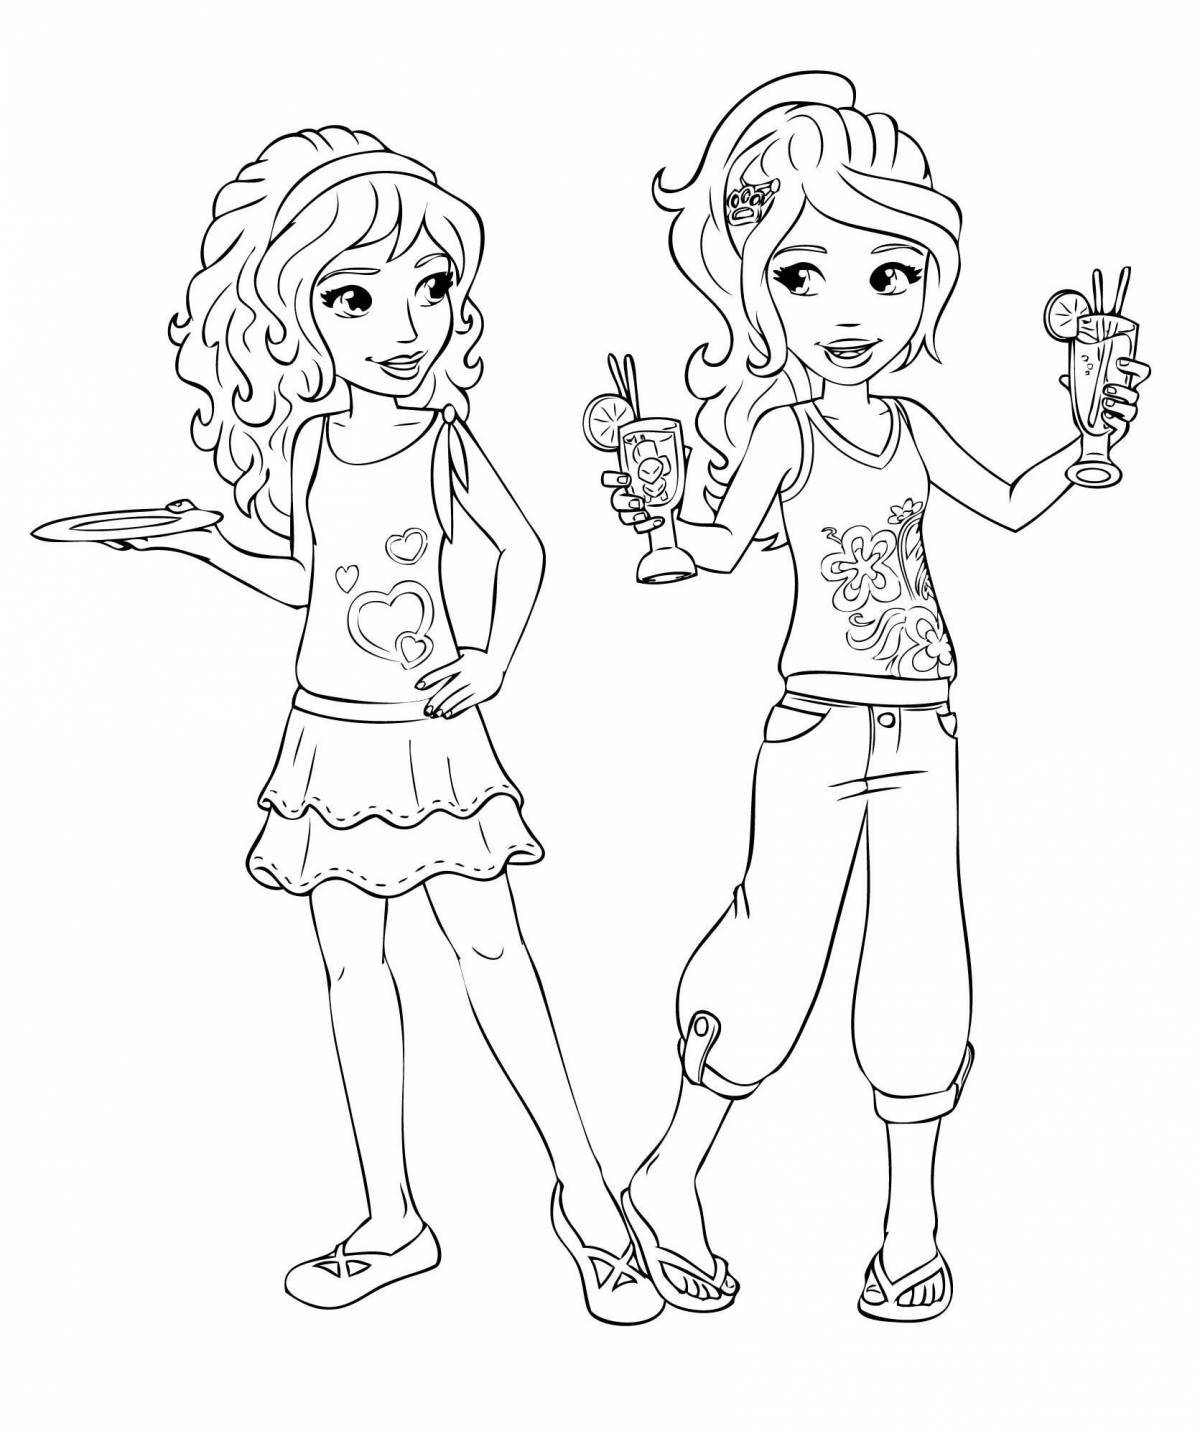 Cute rainbow friends coloring page